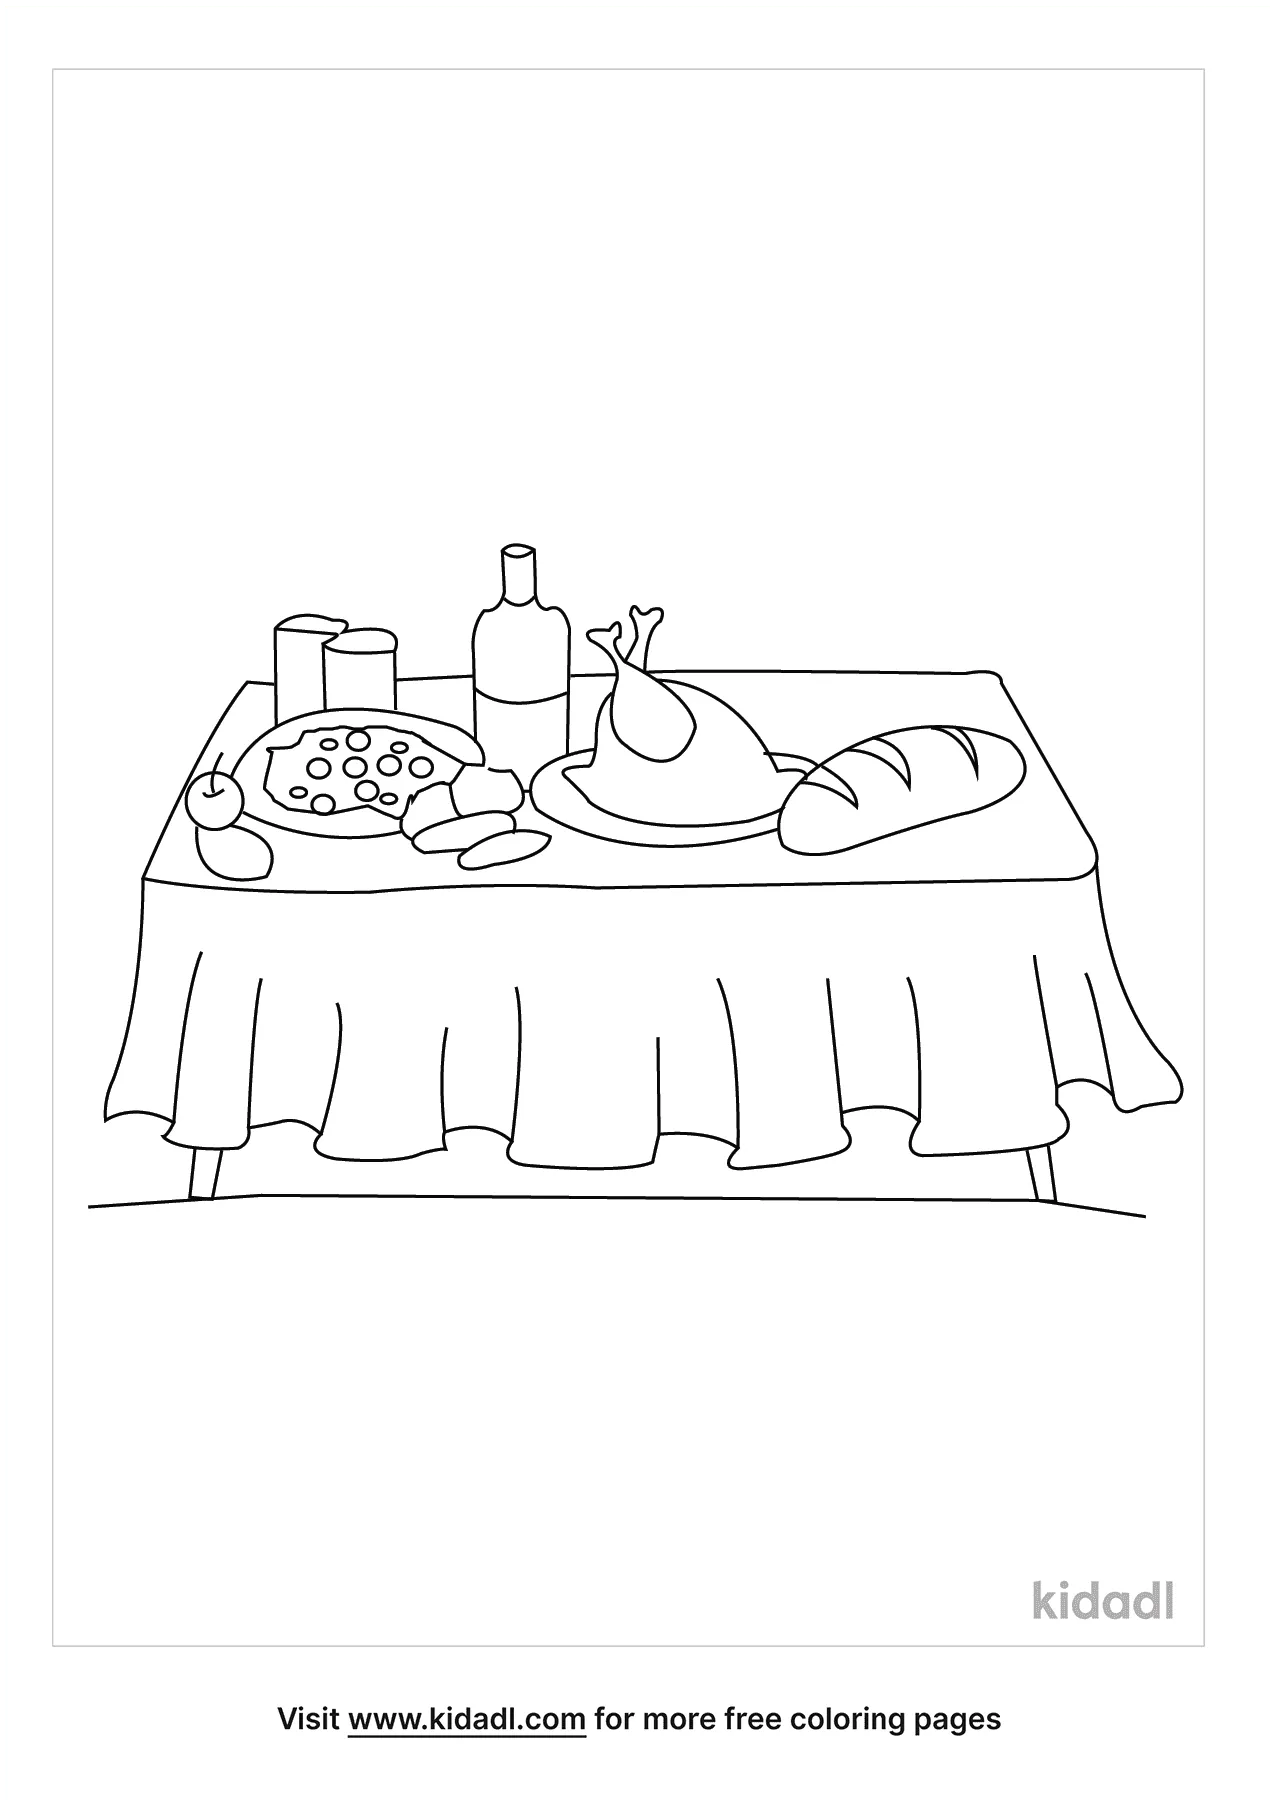 90+ Coloring Pages Table: Designs for Endless Fun 92